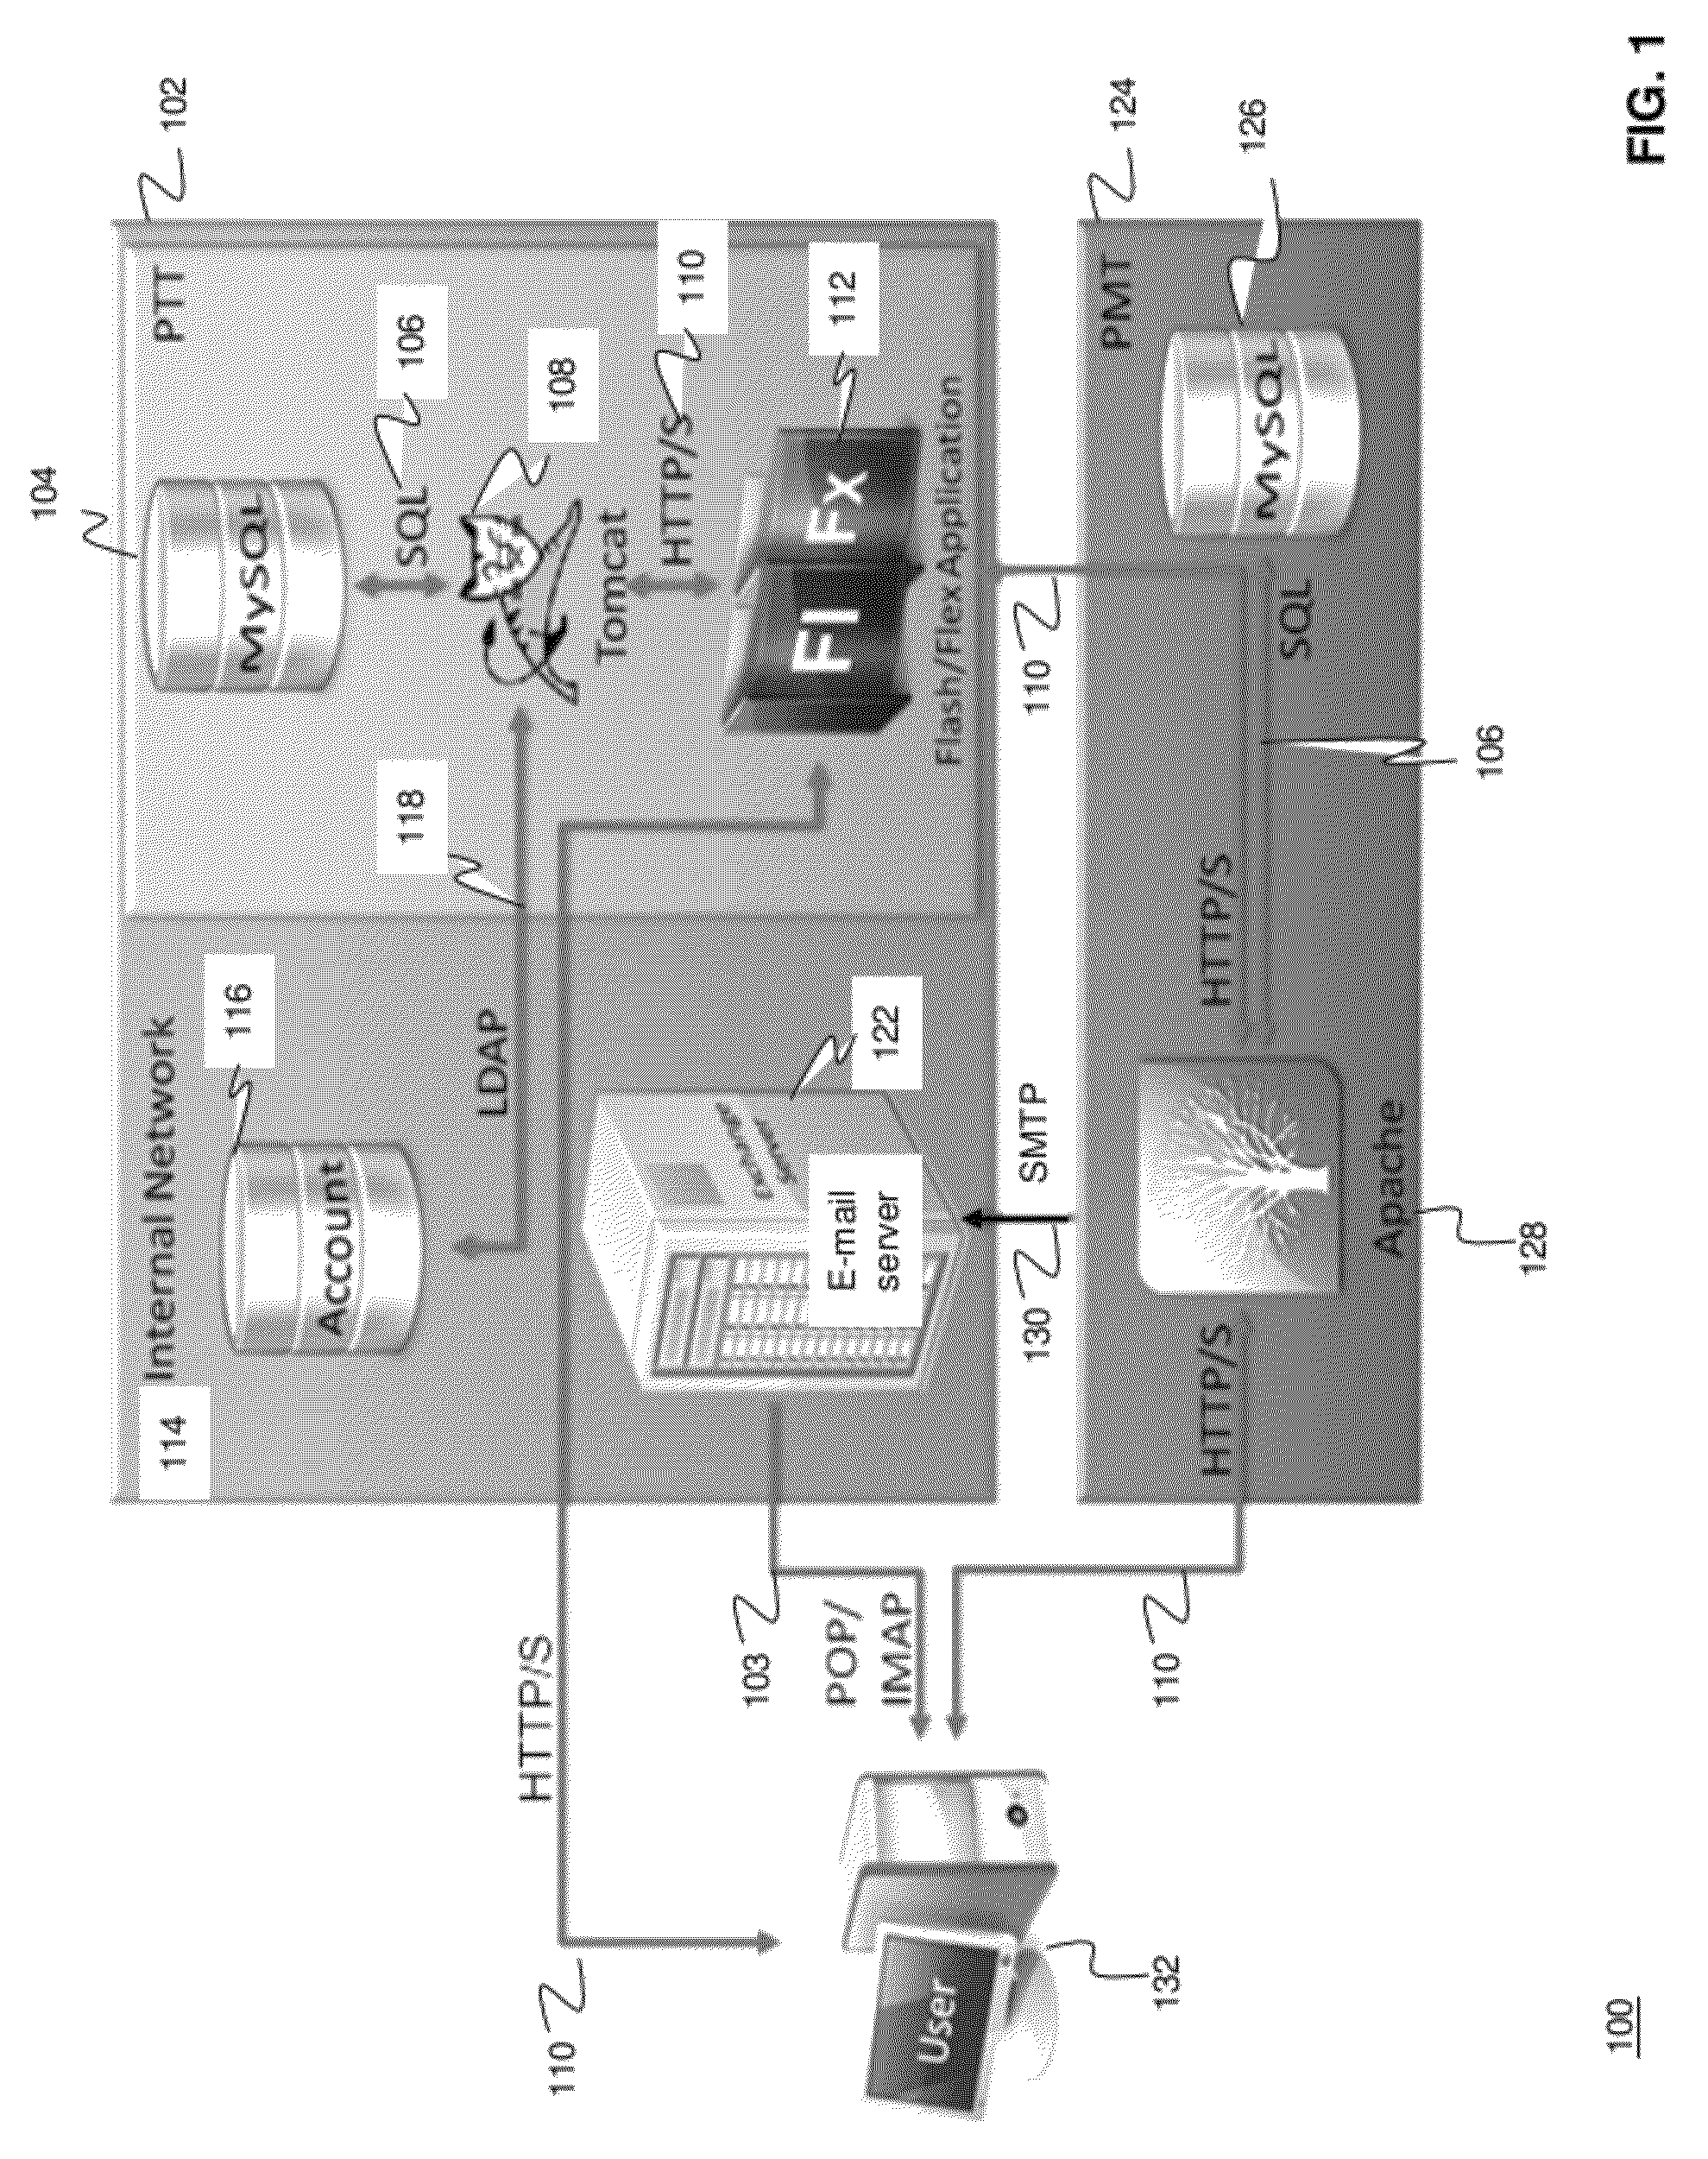 Systems and methods for identifying and mitigating information security risks